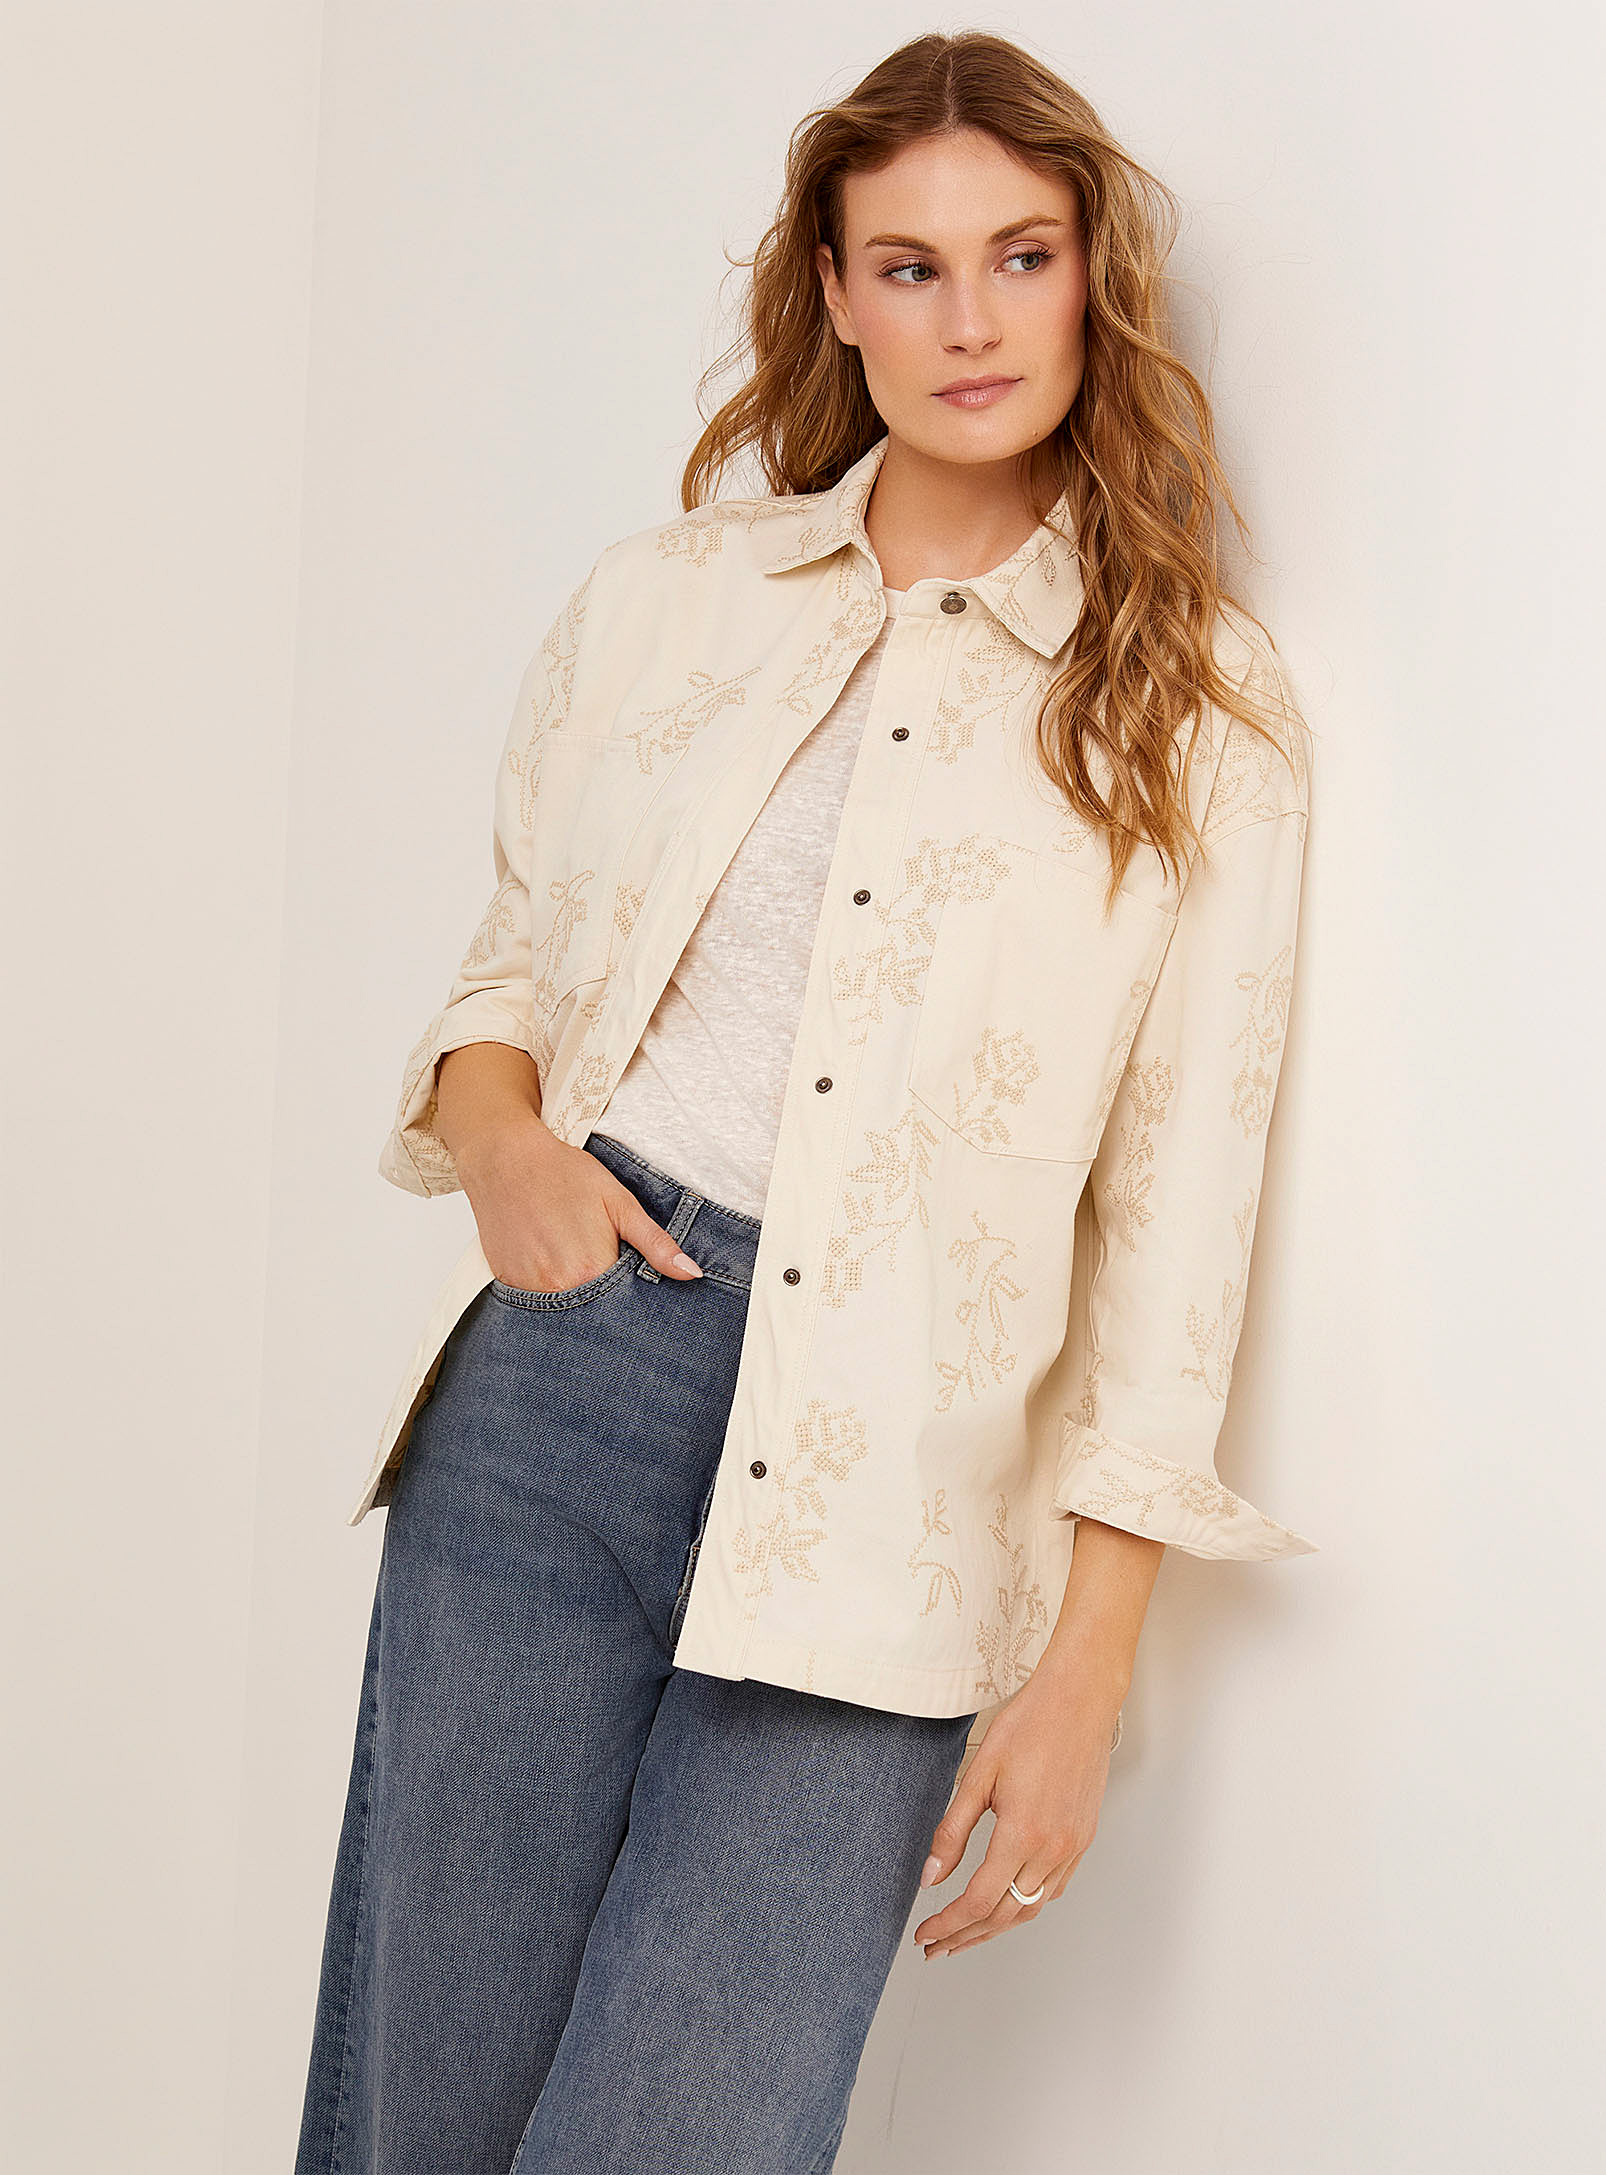 Contemporaine Tone-on Tone Embroidery Overshirt In Patterned White